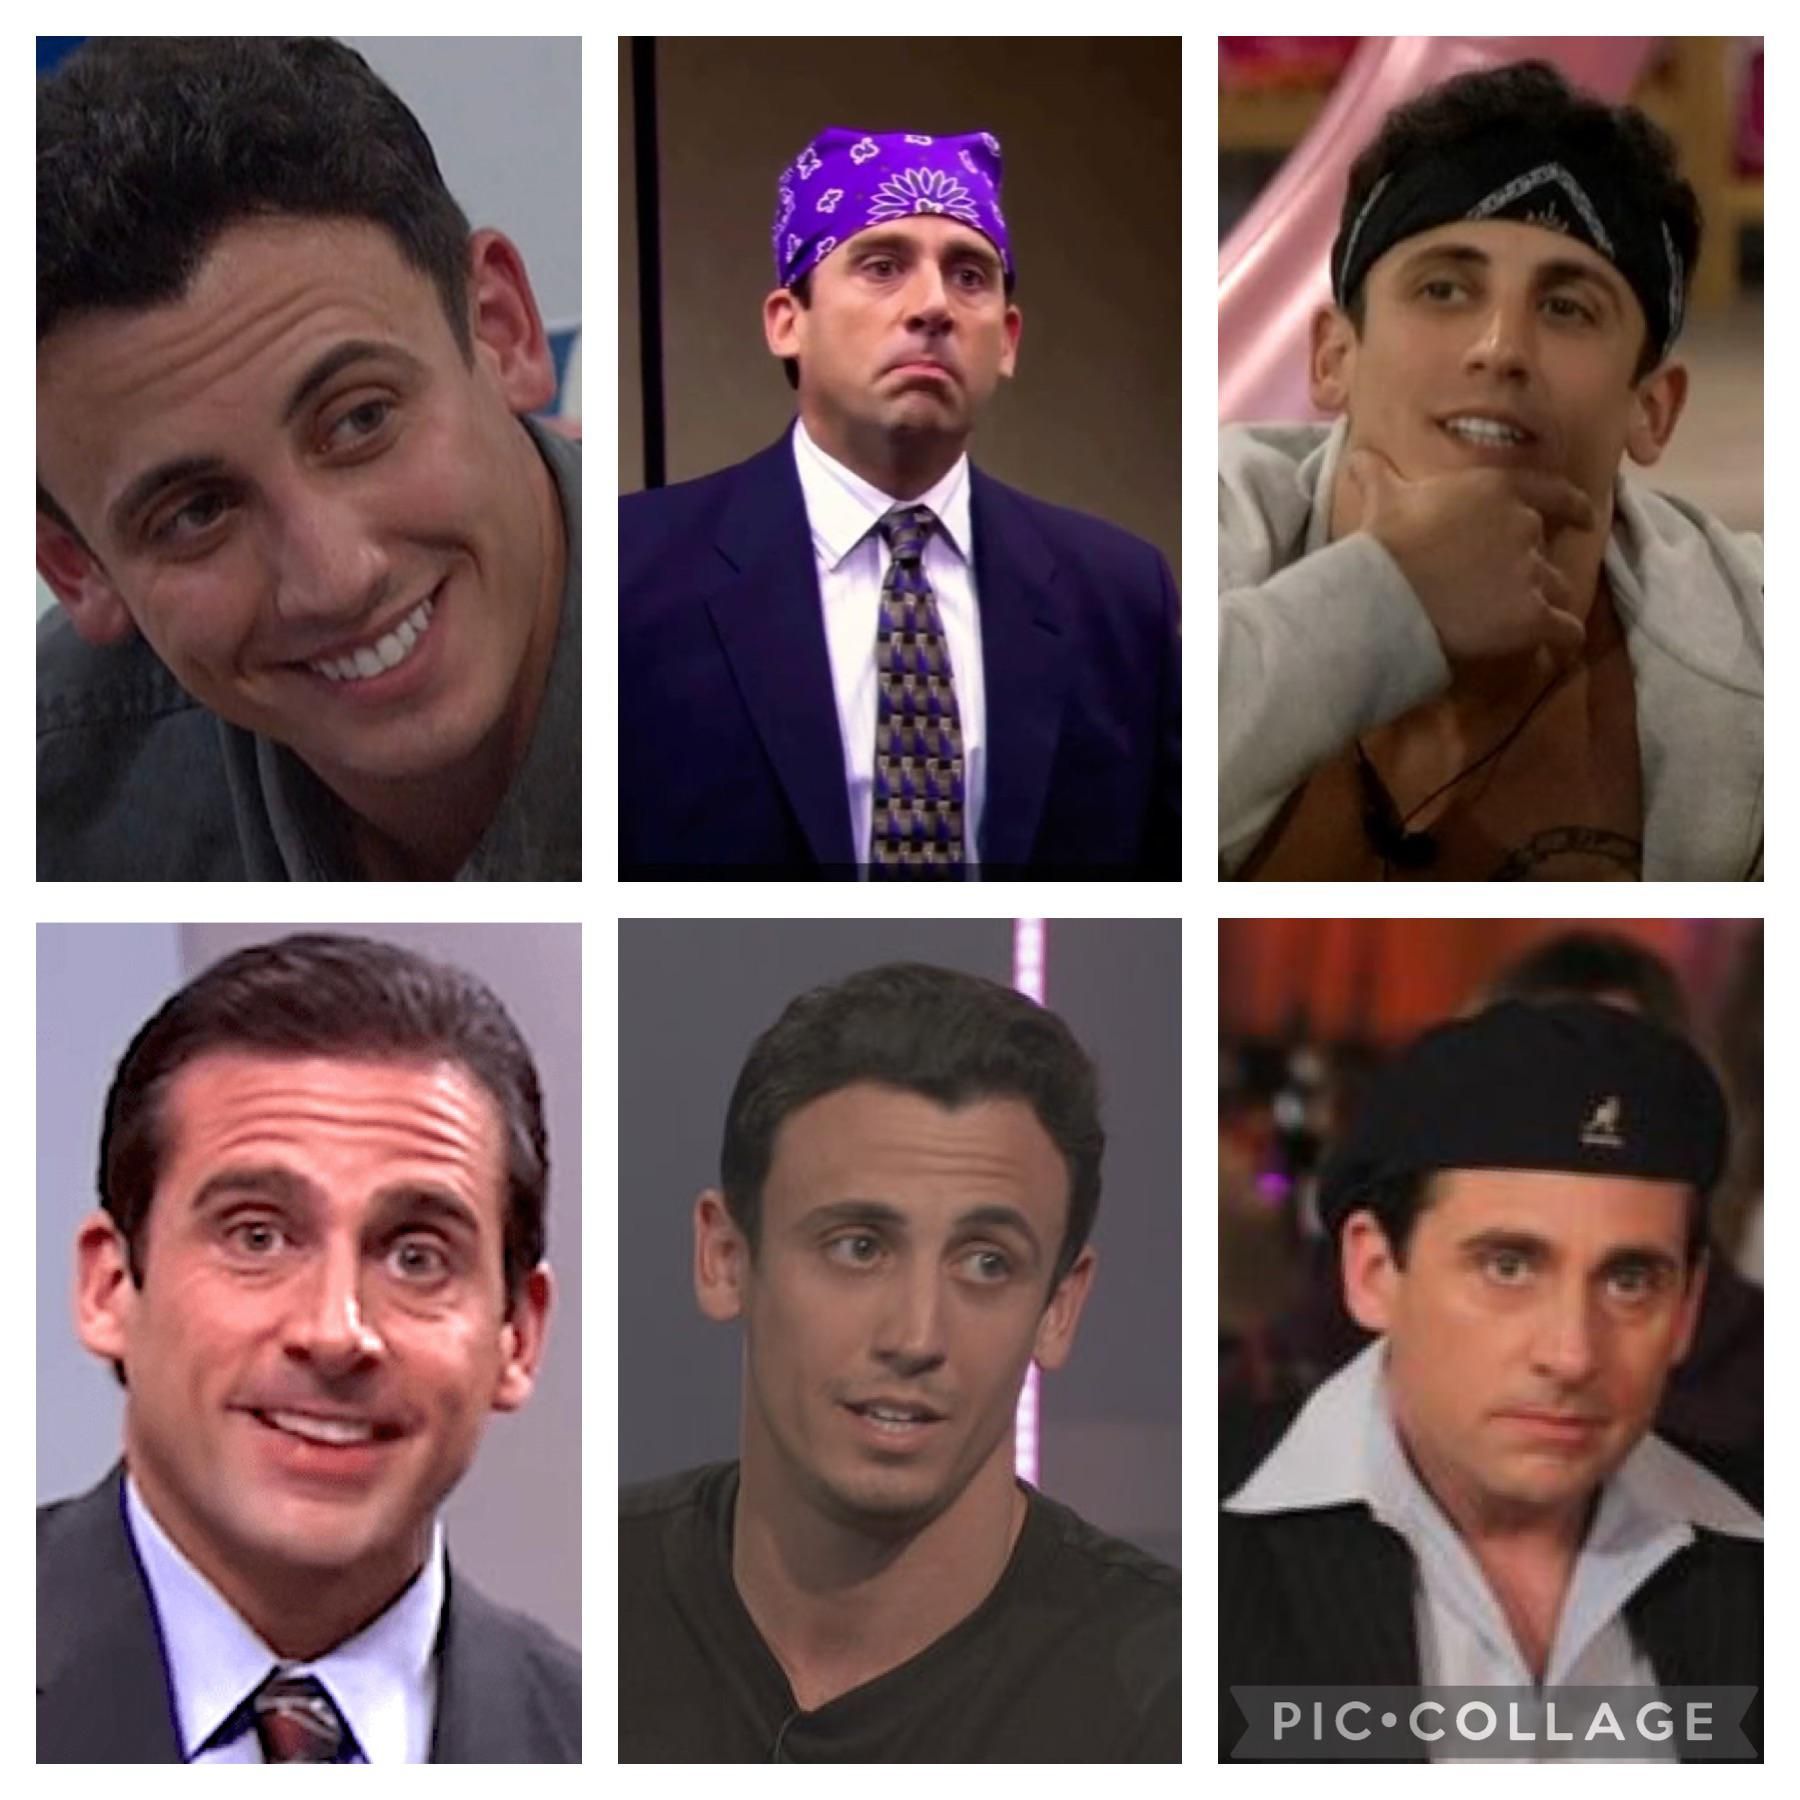 Split image: Three pics of Brent from Big Brother side by side with three pics of Michael Scott from The Office